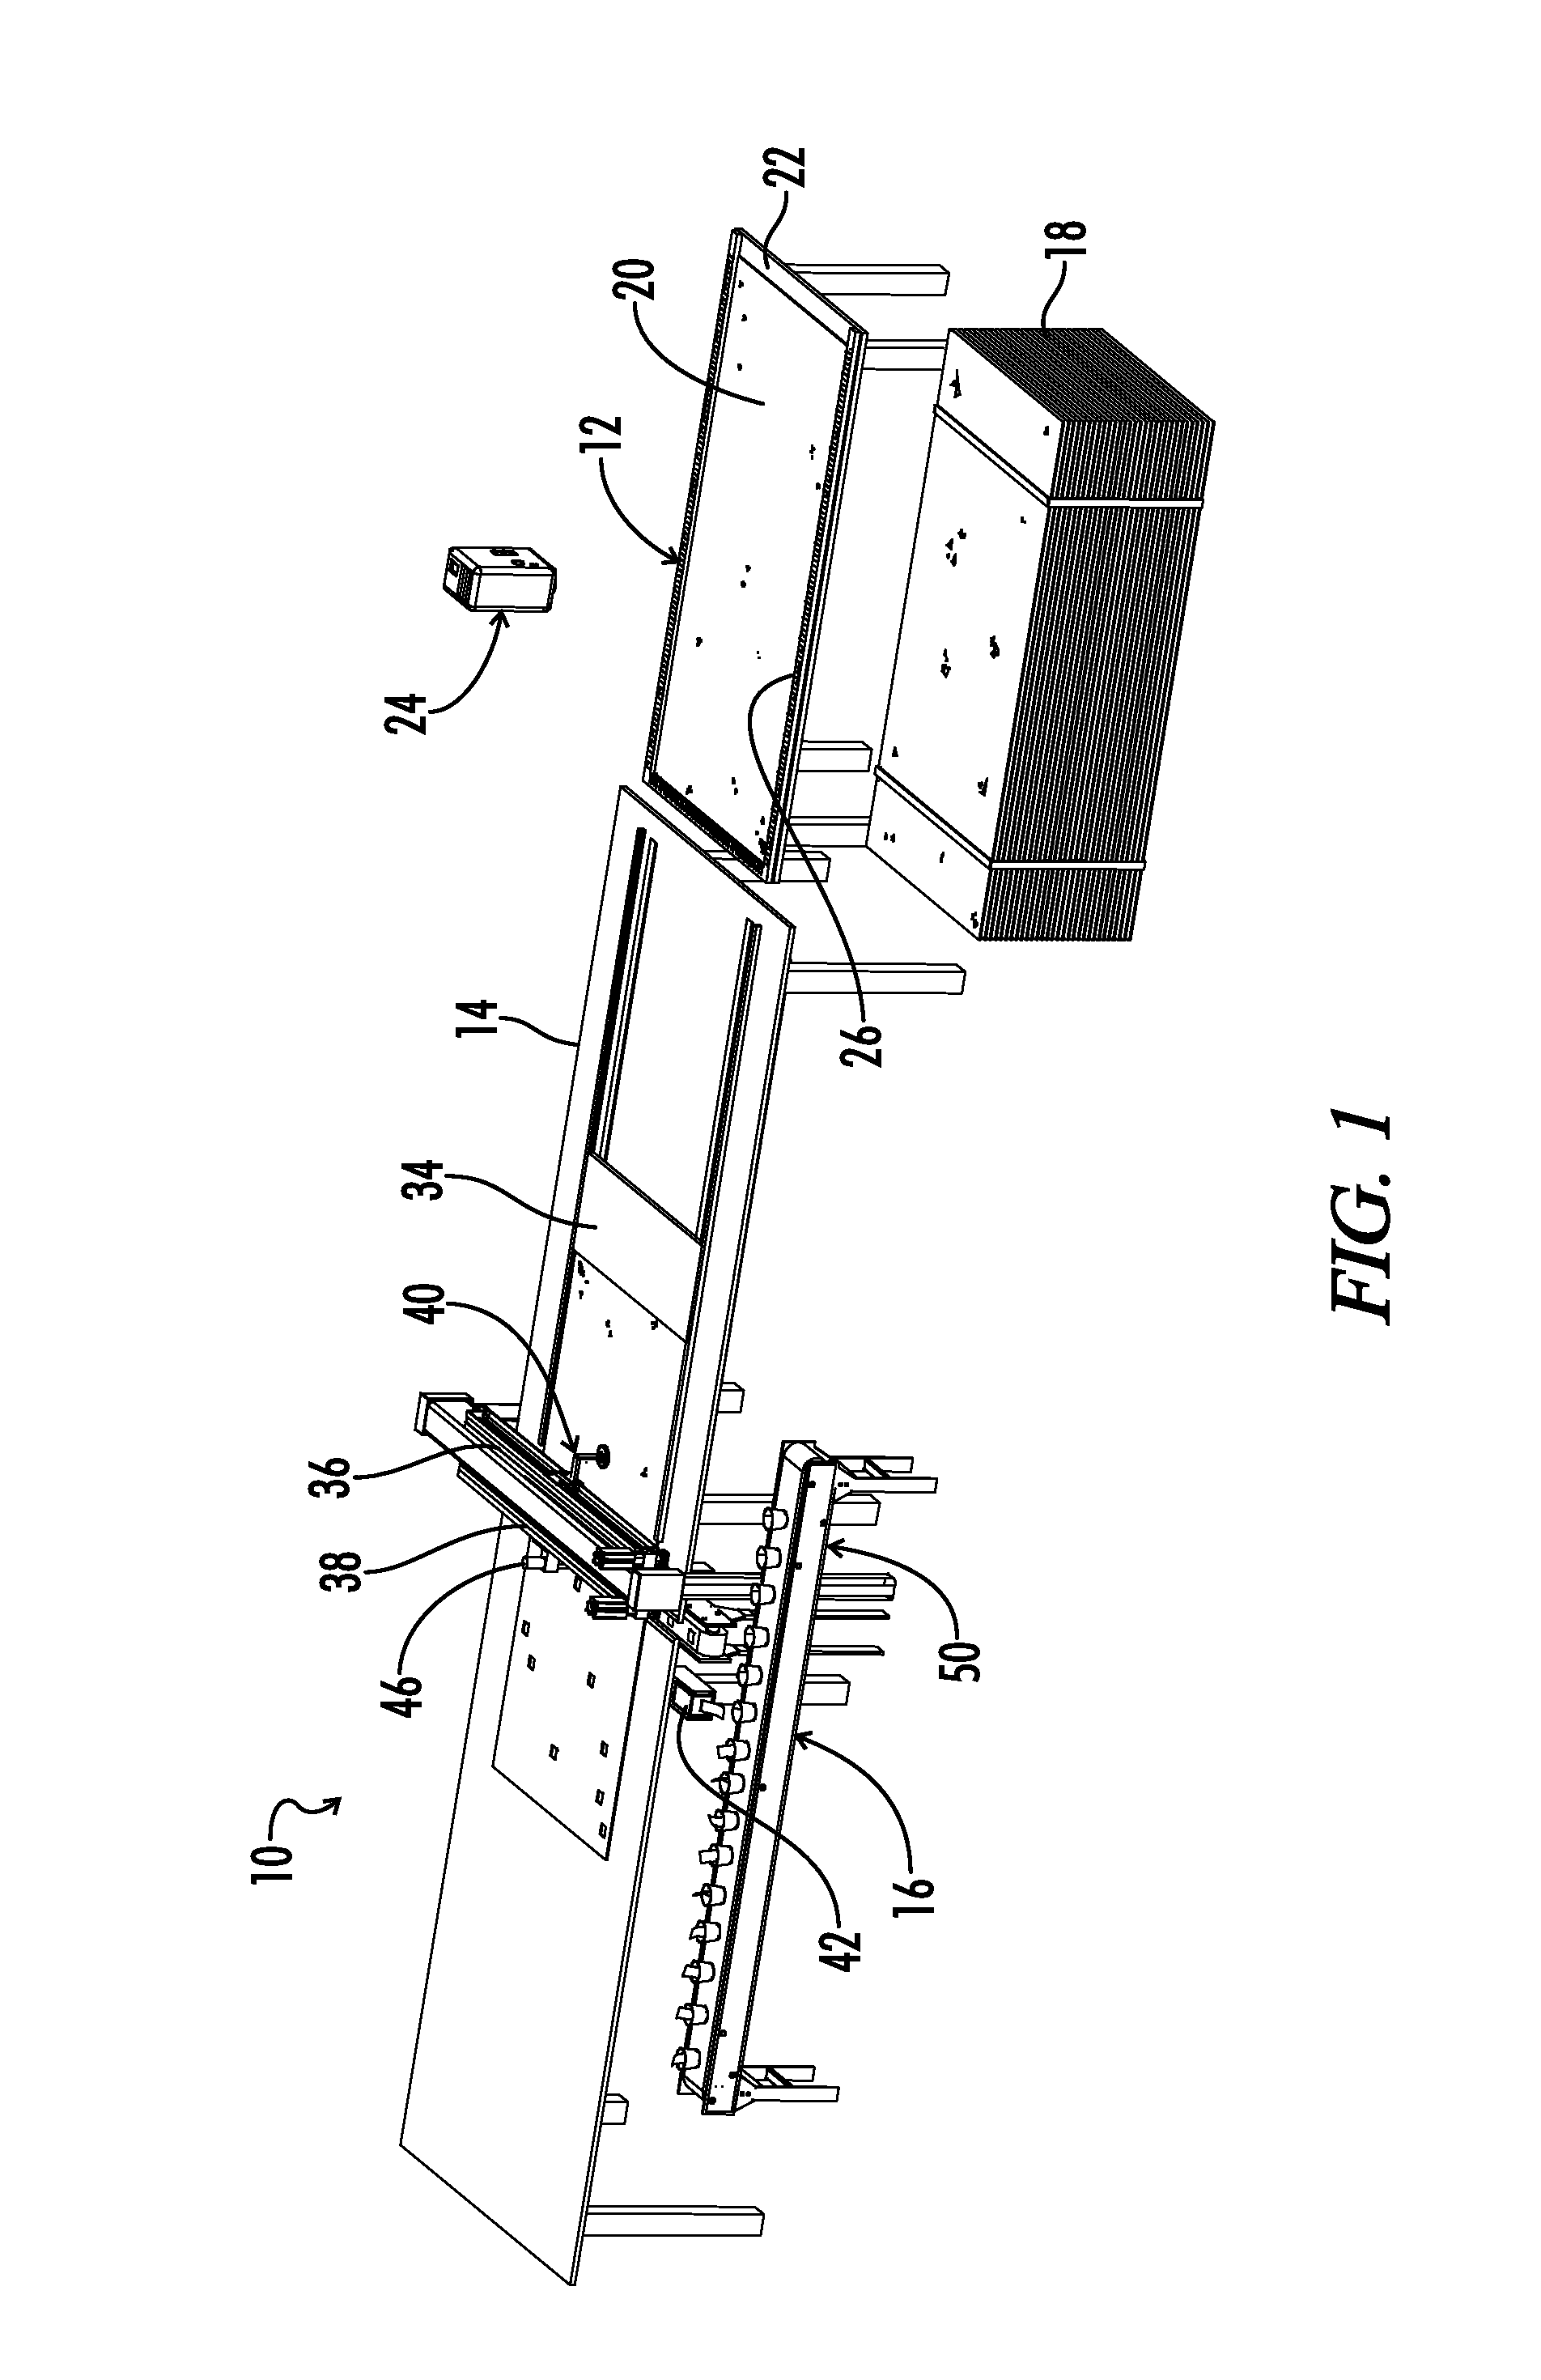 Automated fragment collection apparatus